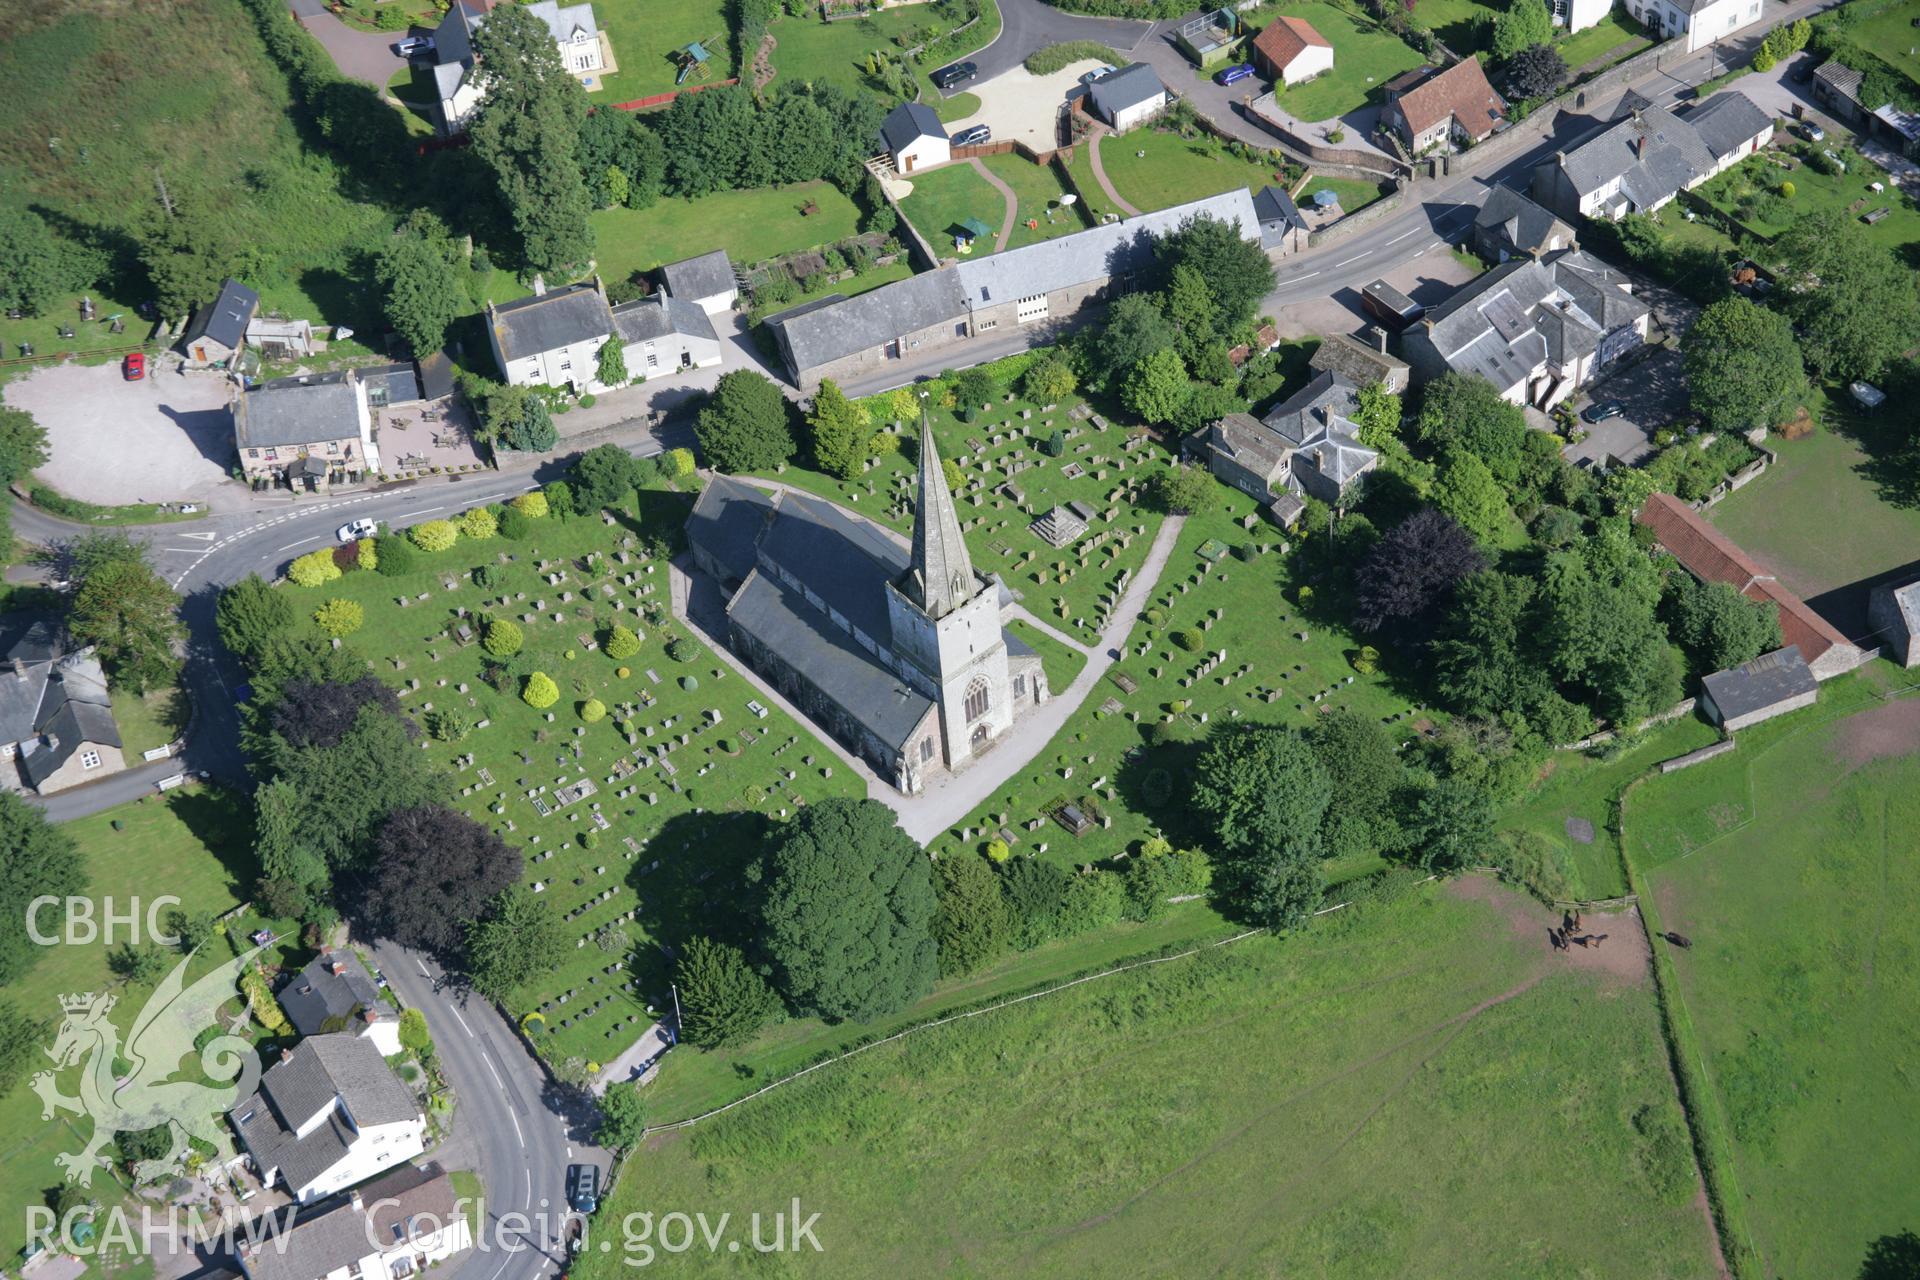 RCAHMW colour oblique aerial photograph of Trellech. Taken on 13 July 2006 by Toby Driver.